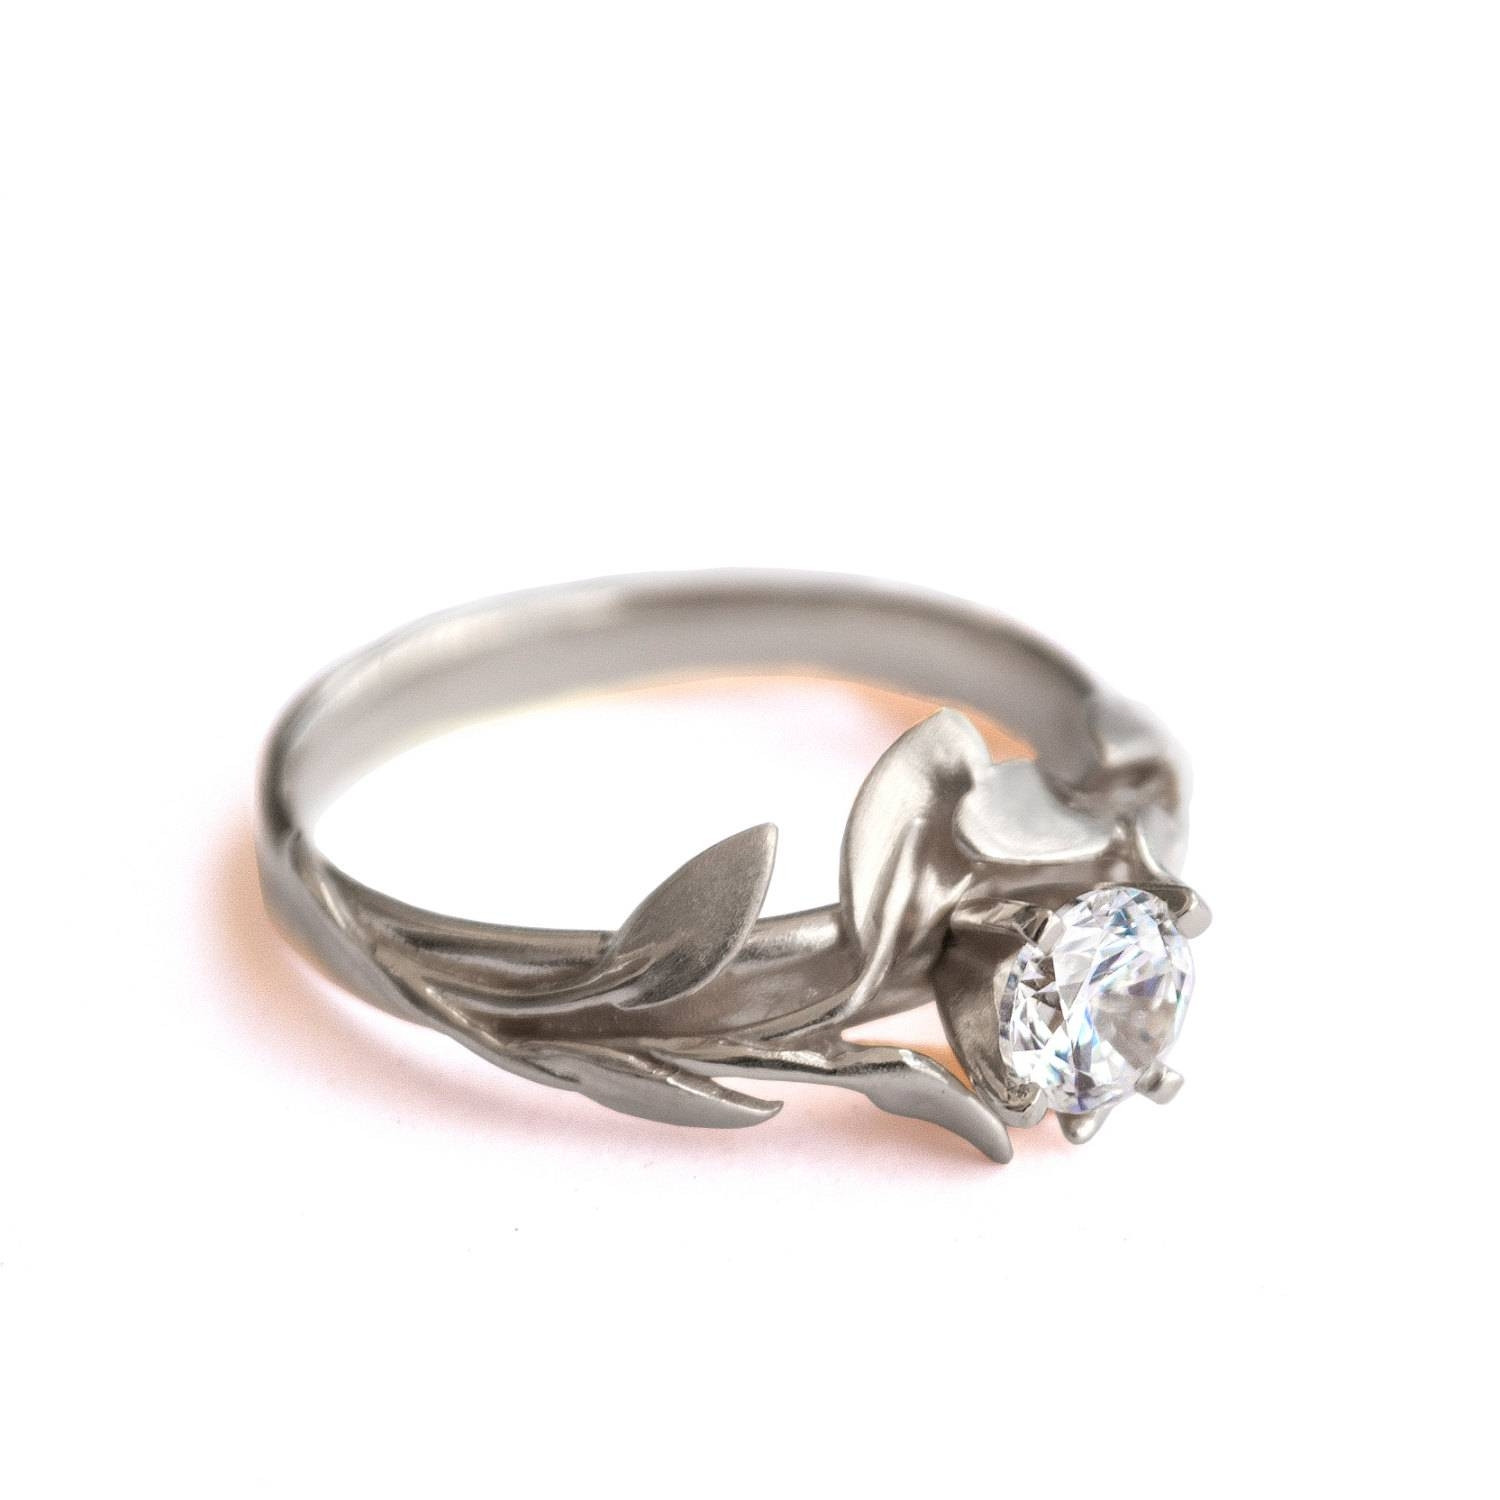 The Best Wedding Rings without Diamonds - Home, Family ...